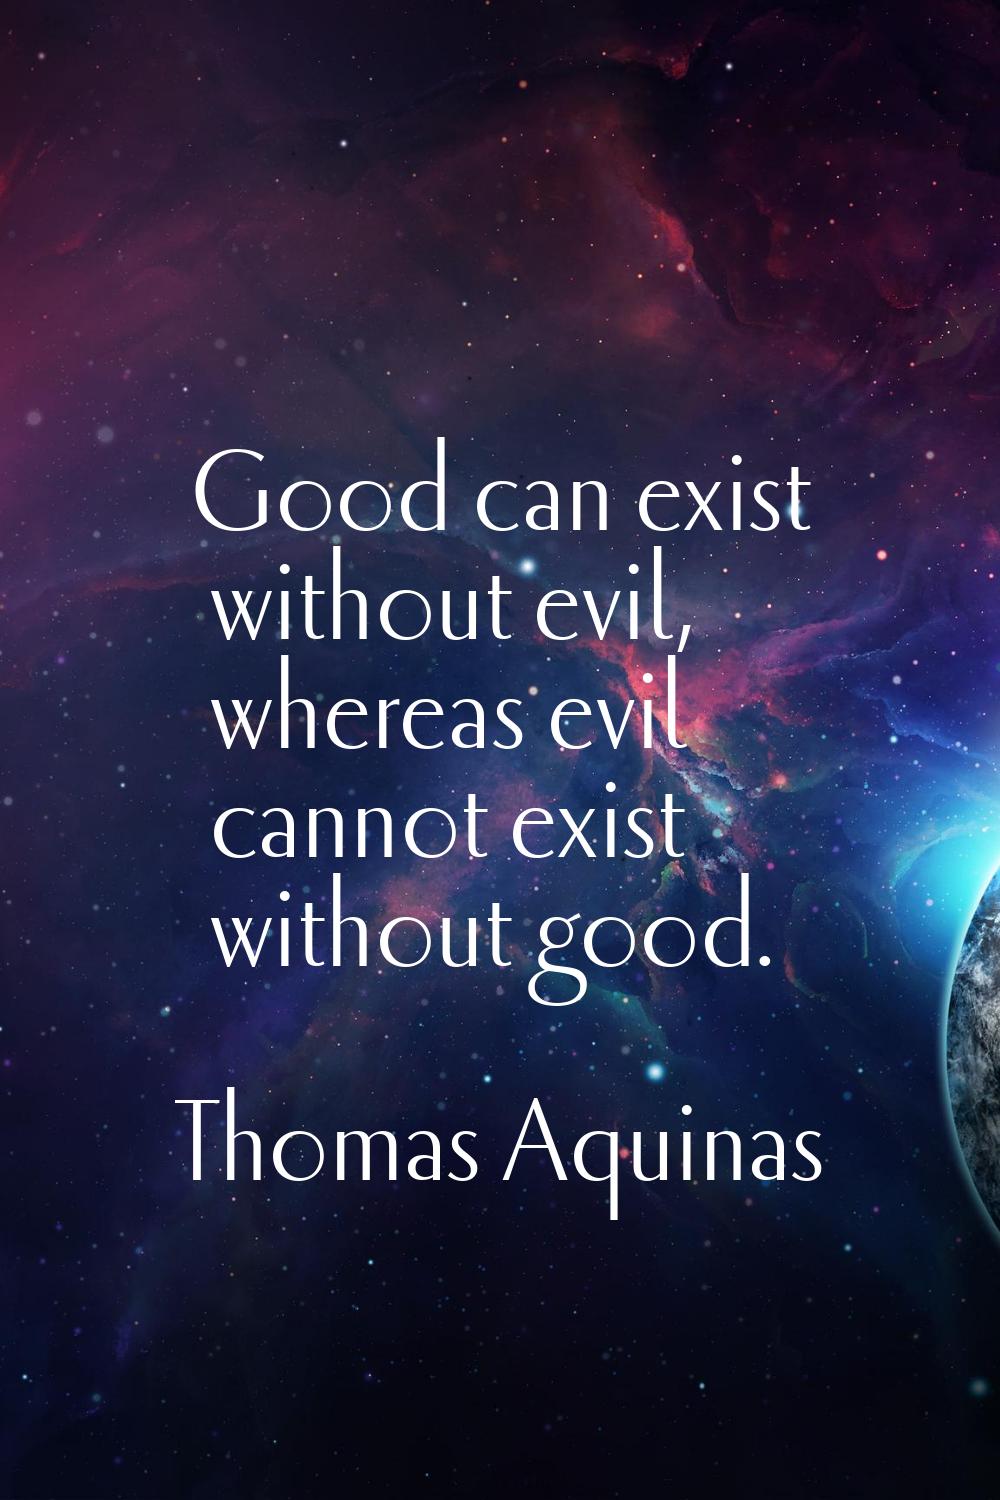 Good can exist without evil, whereas evil cannot exist without good.